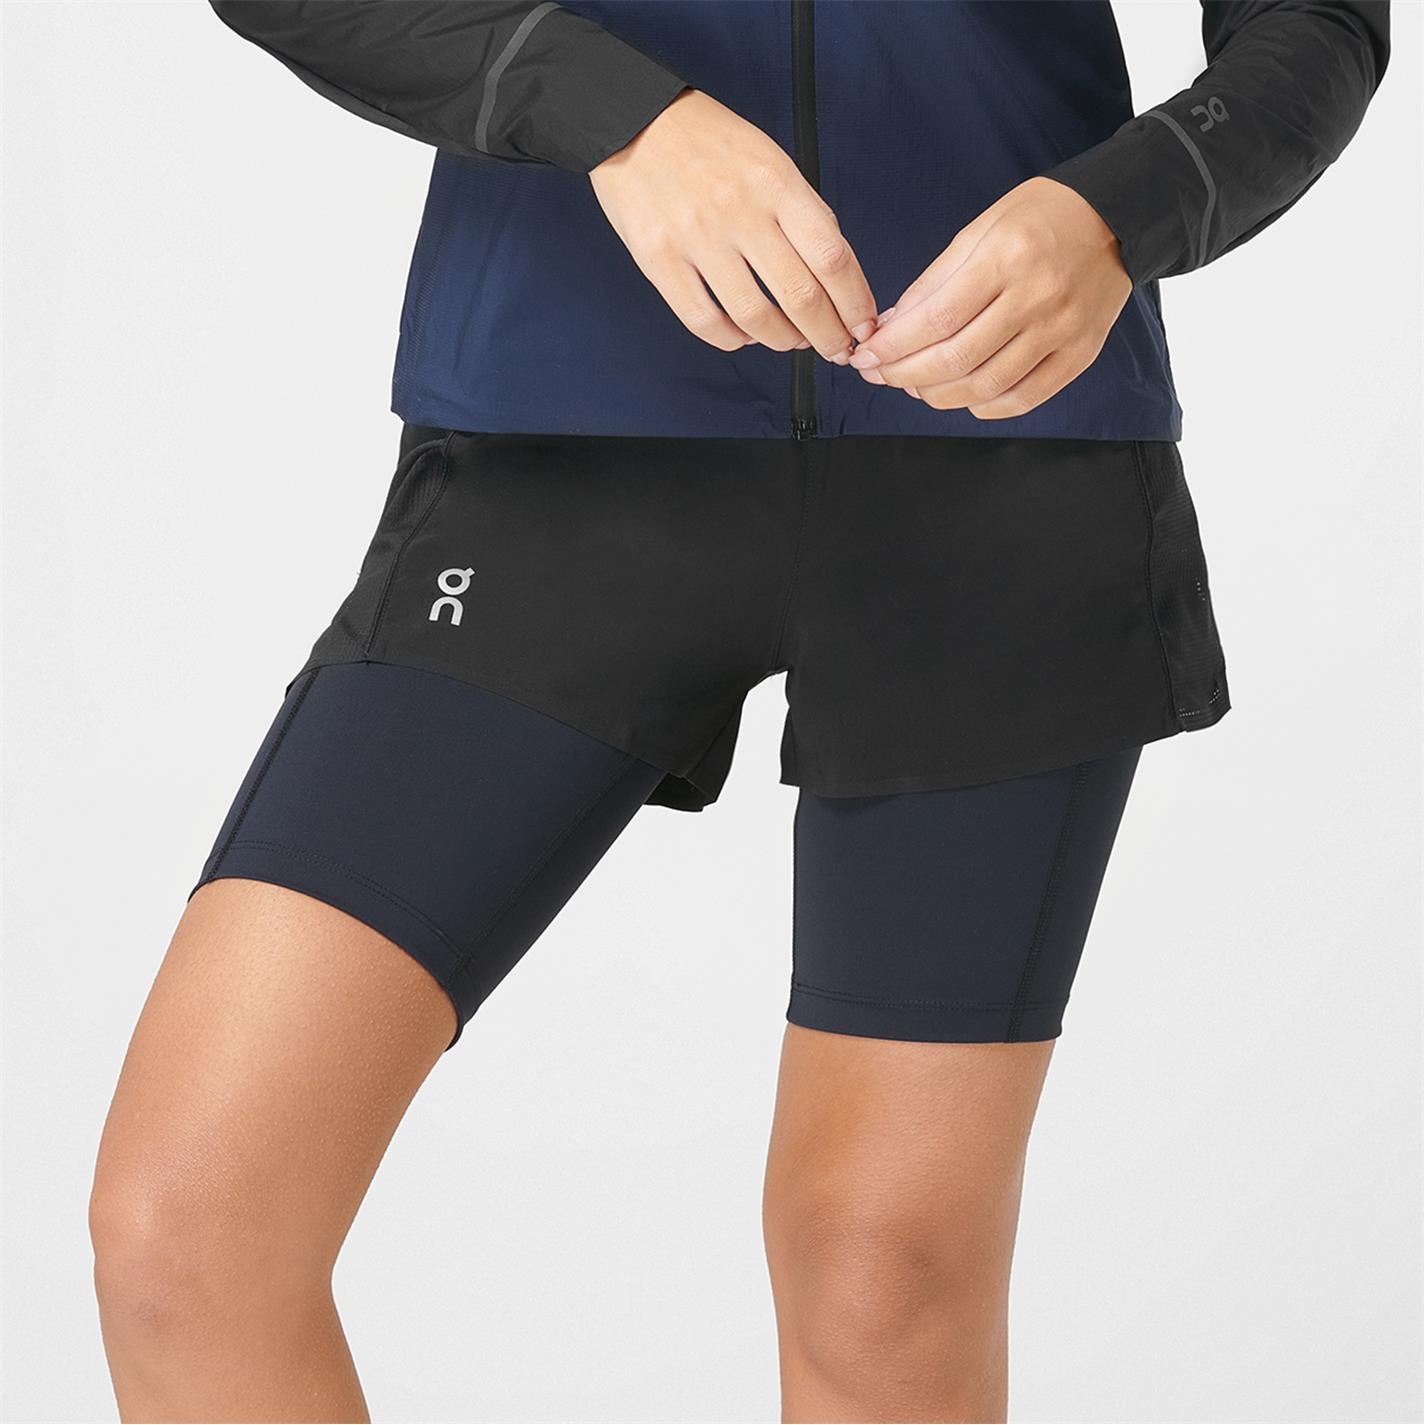 ACTIVE SHORTS 2 IN 1 - 5